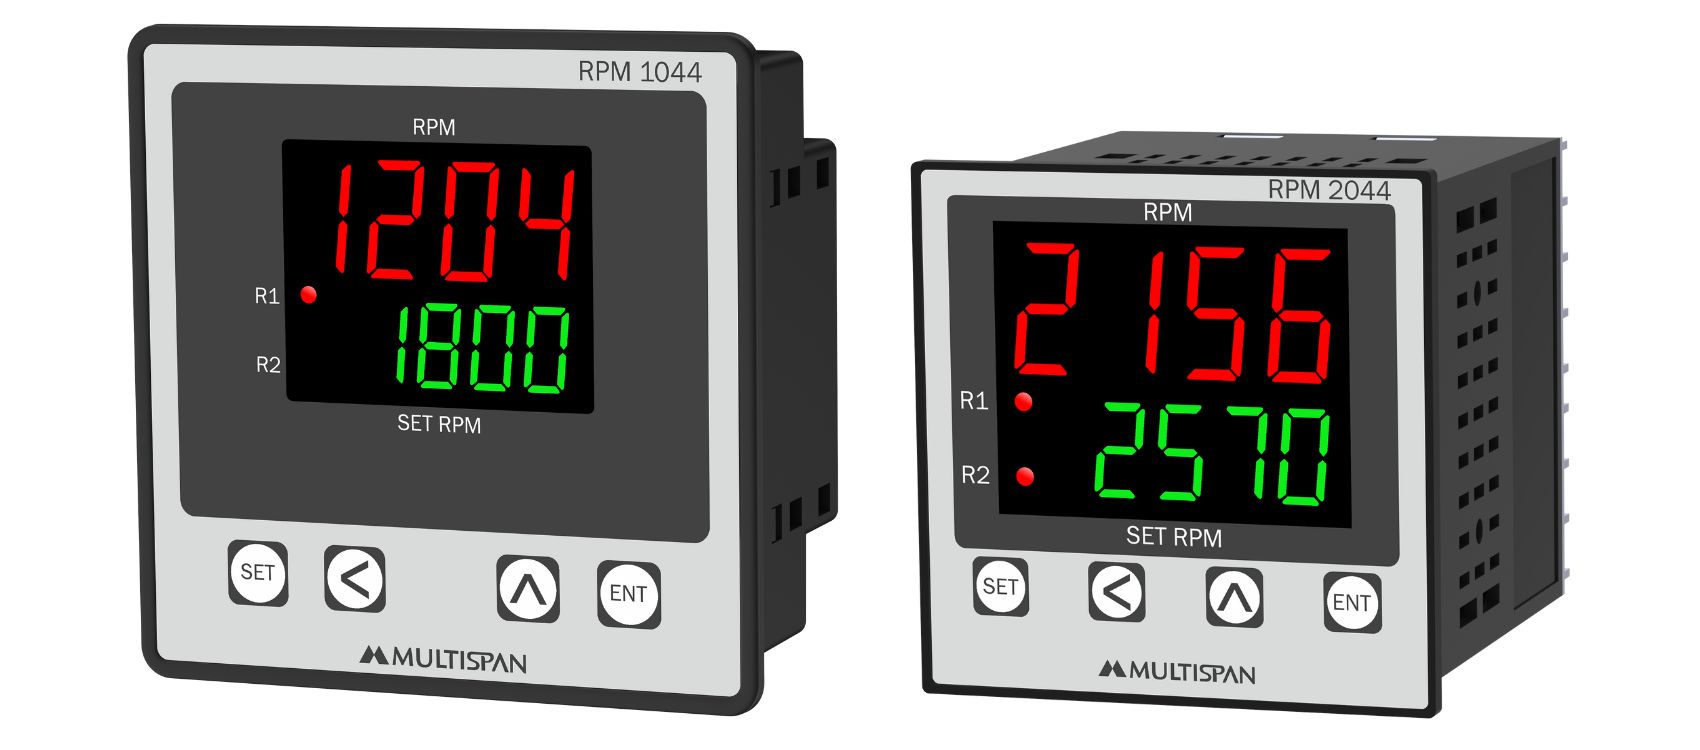 RPM-1044-RPM Controller - product image